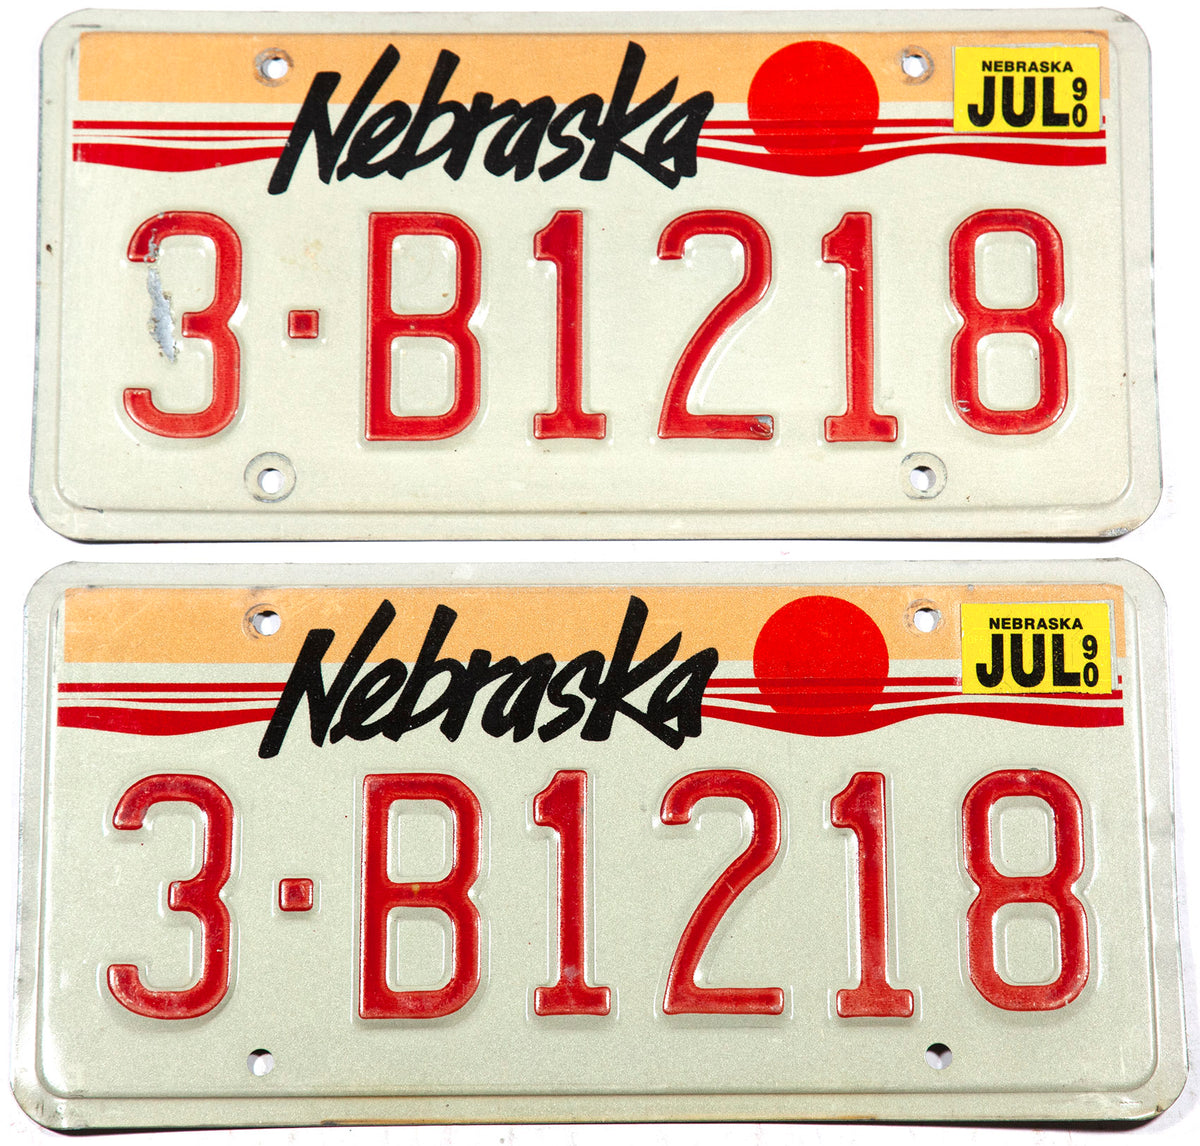 1990 Nebraska car license plates from Gage County in very good plus condition